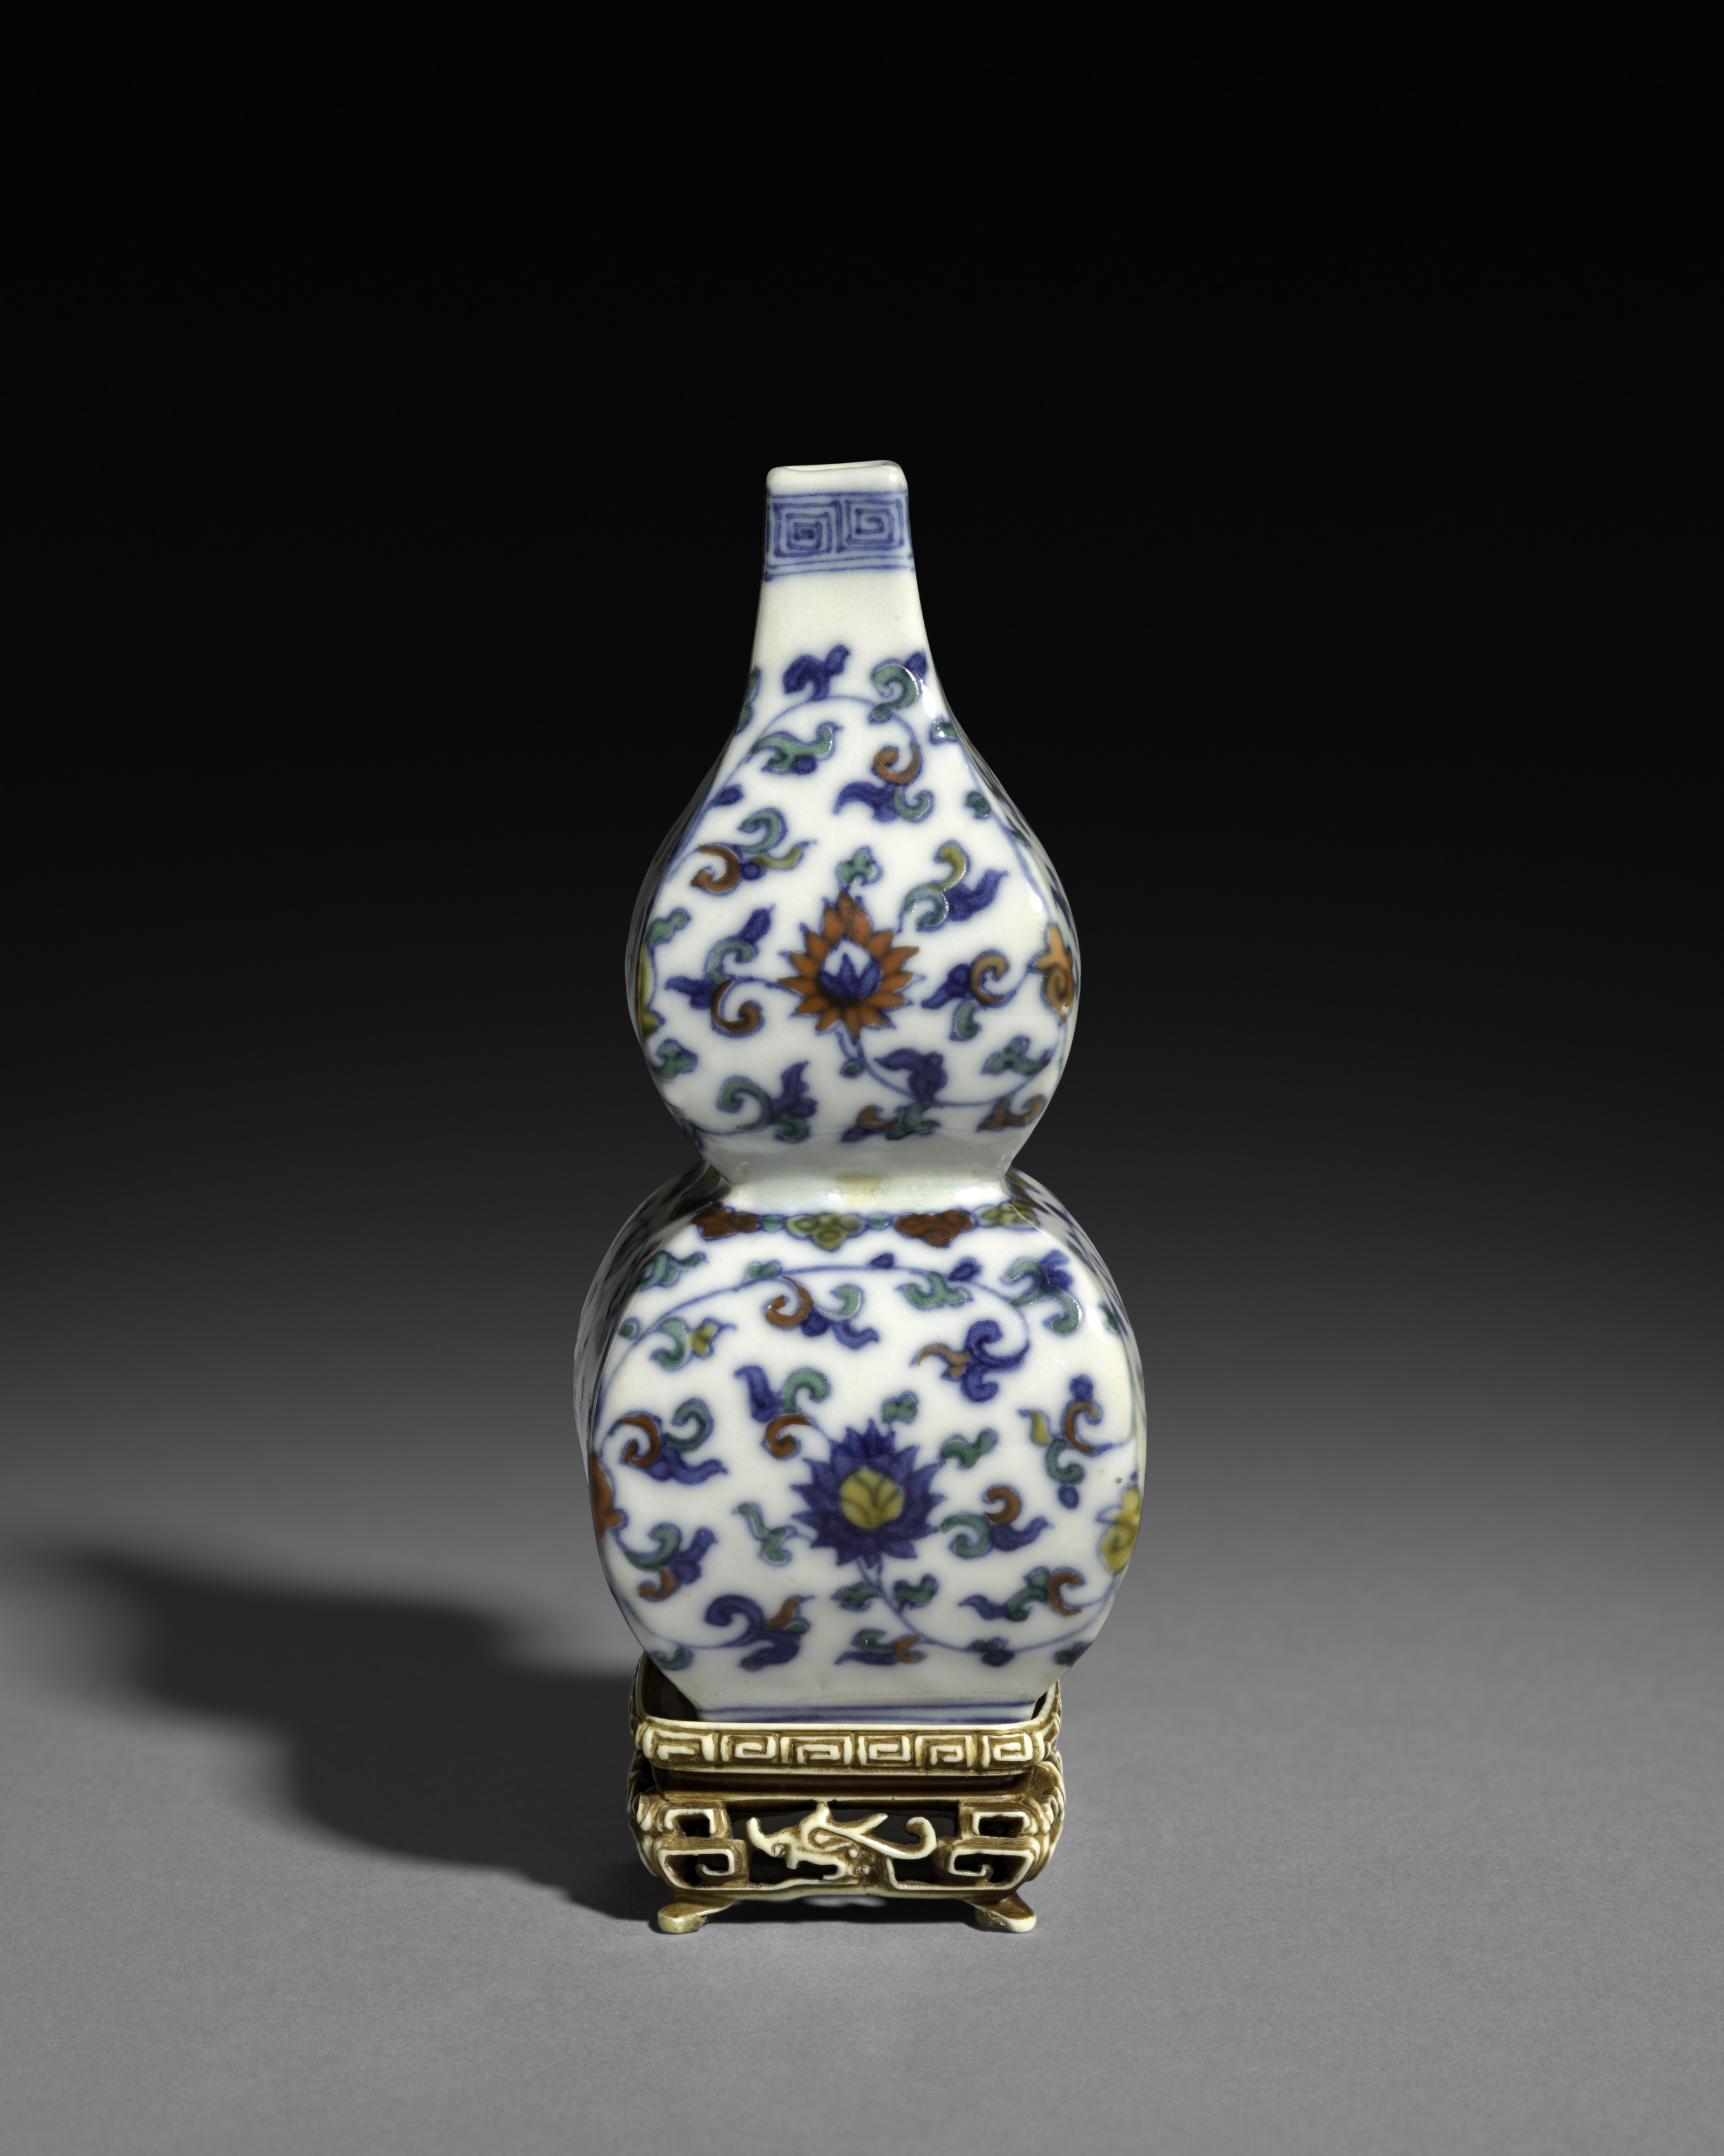 Square Double-Gourd Vase with Floral Scrolls